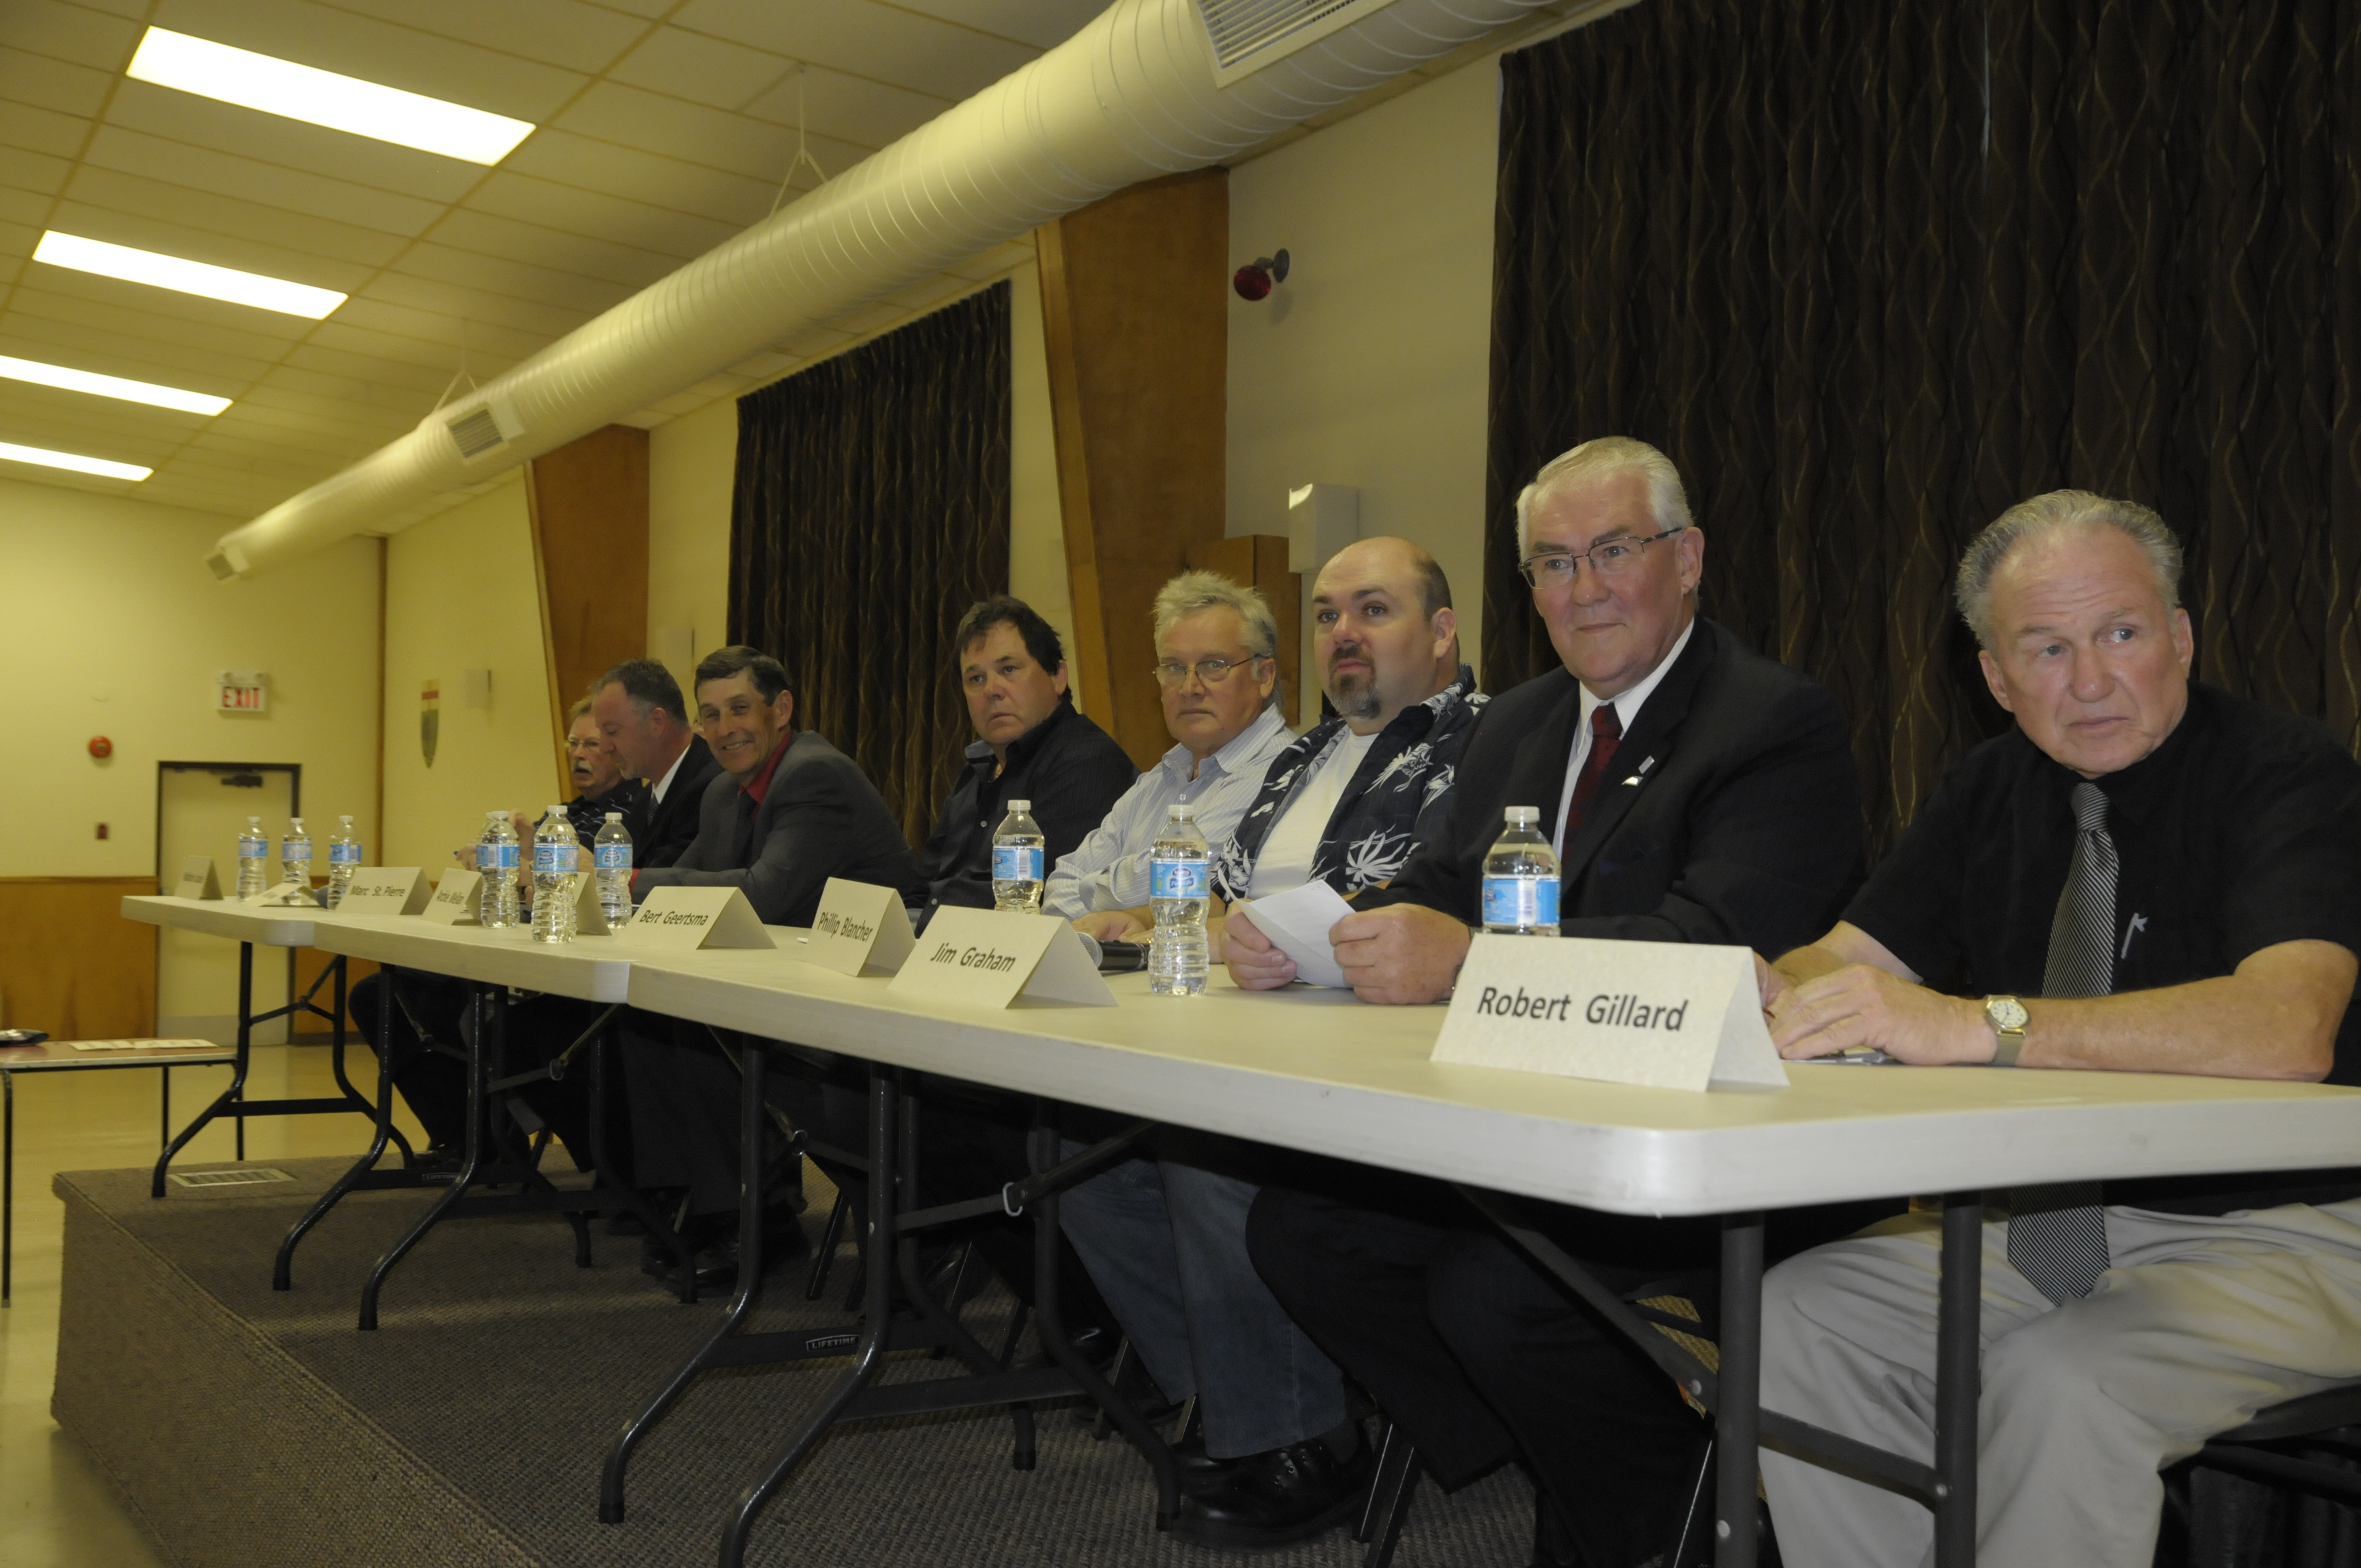 Running for councillor in South Dundas are (from left) Mahlen Locke, Bill Ewing (not shown), Marc St. Pierre, Archie Mellan, Jim Mills, Bert Geertsma, Phillip Blancher, Jim Graham and Robert Gillard. They were taking questions from the audience during the all candidates debate at Matilda Hall Oct. 14 (Cornwall Newswatch)